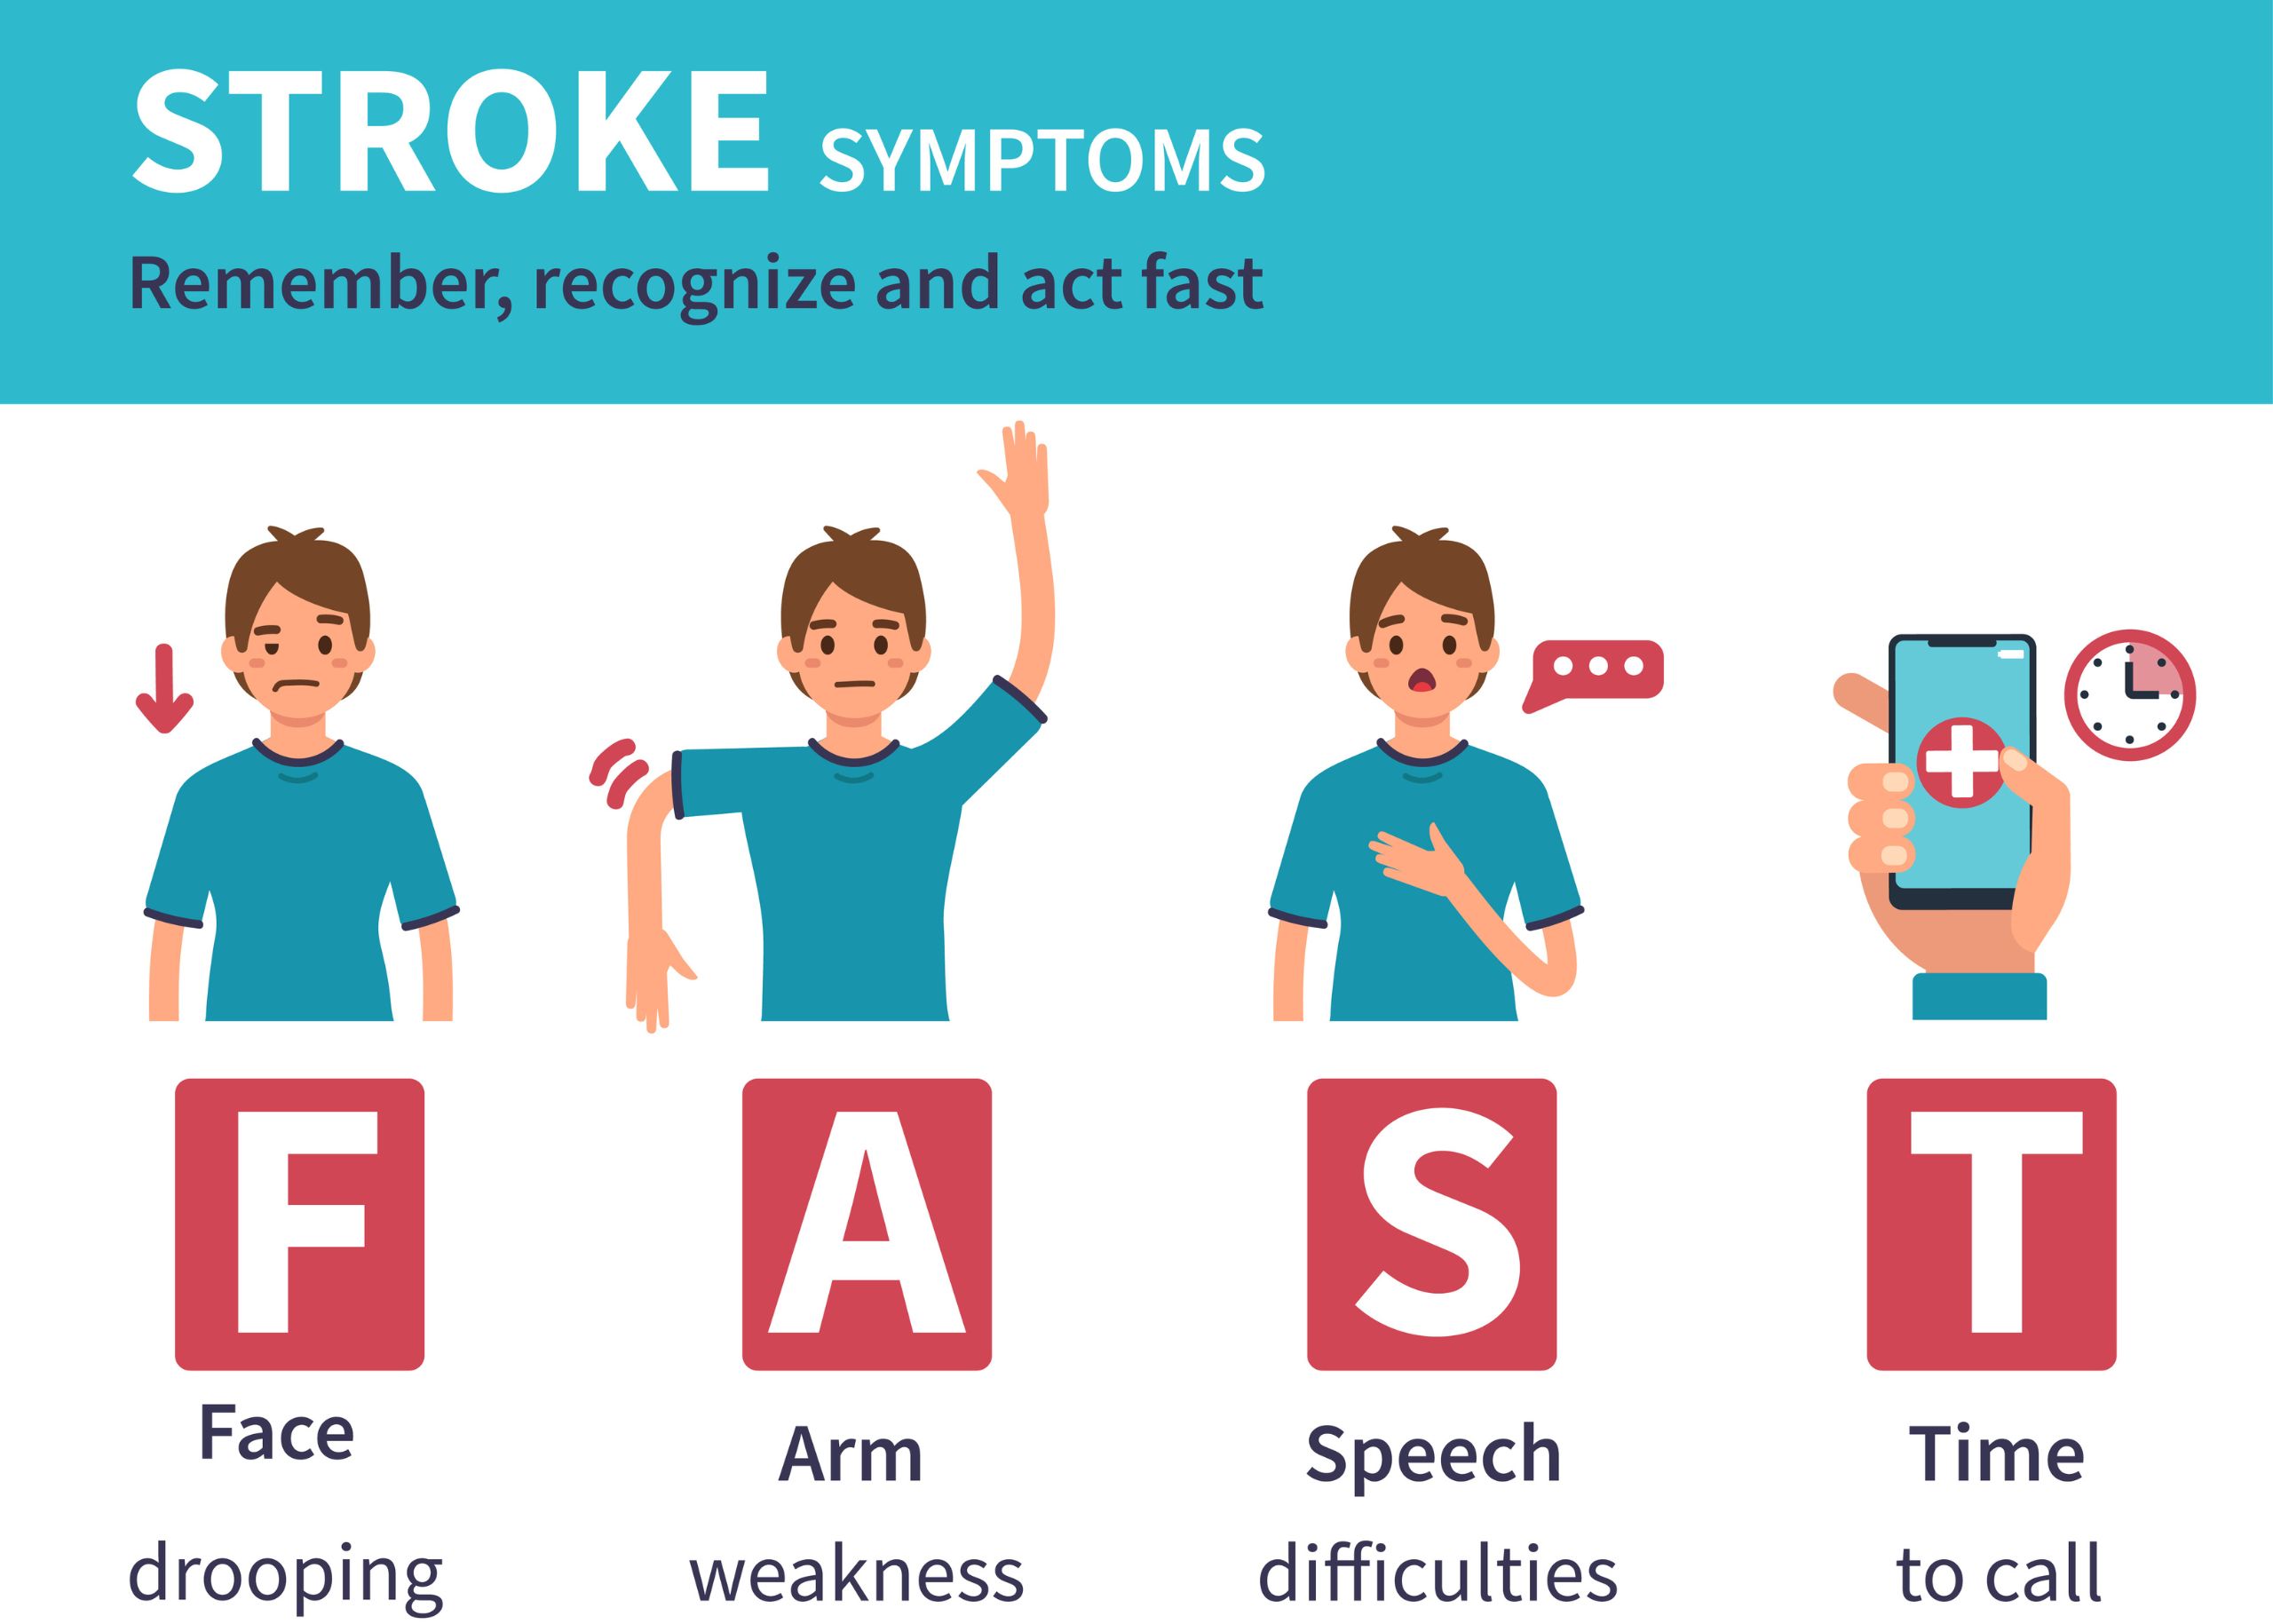 Stroke: Know the Warning Signs